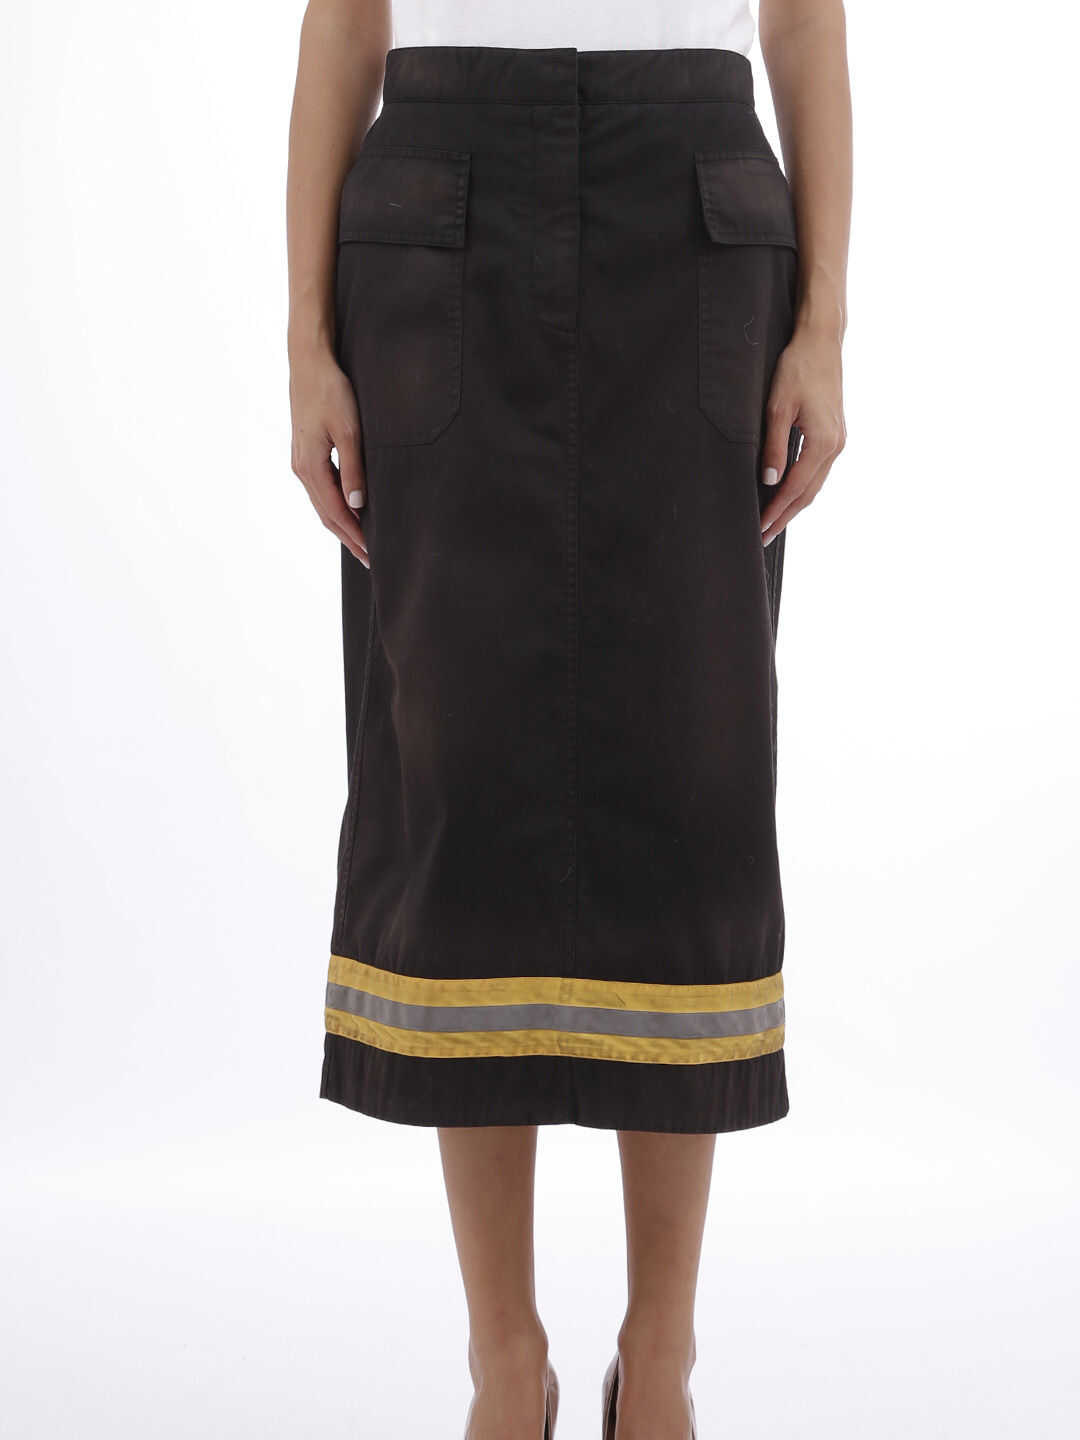 Calvin Klein 205W39NYC Skirt With Reflective Band Black